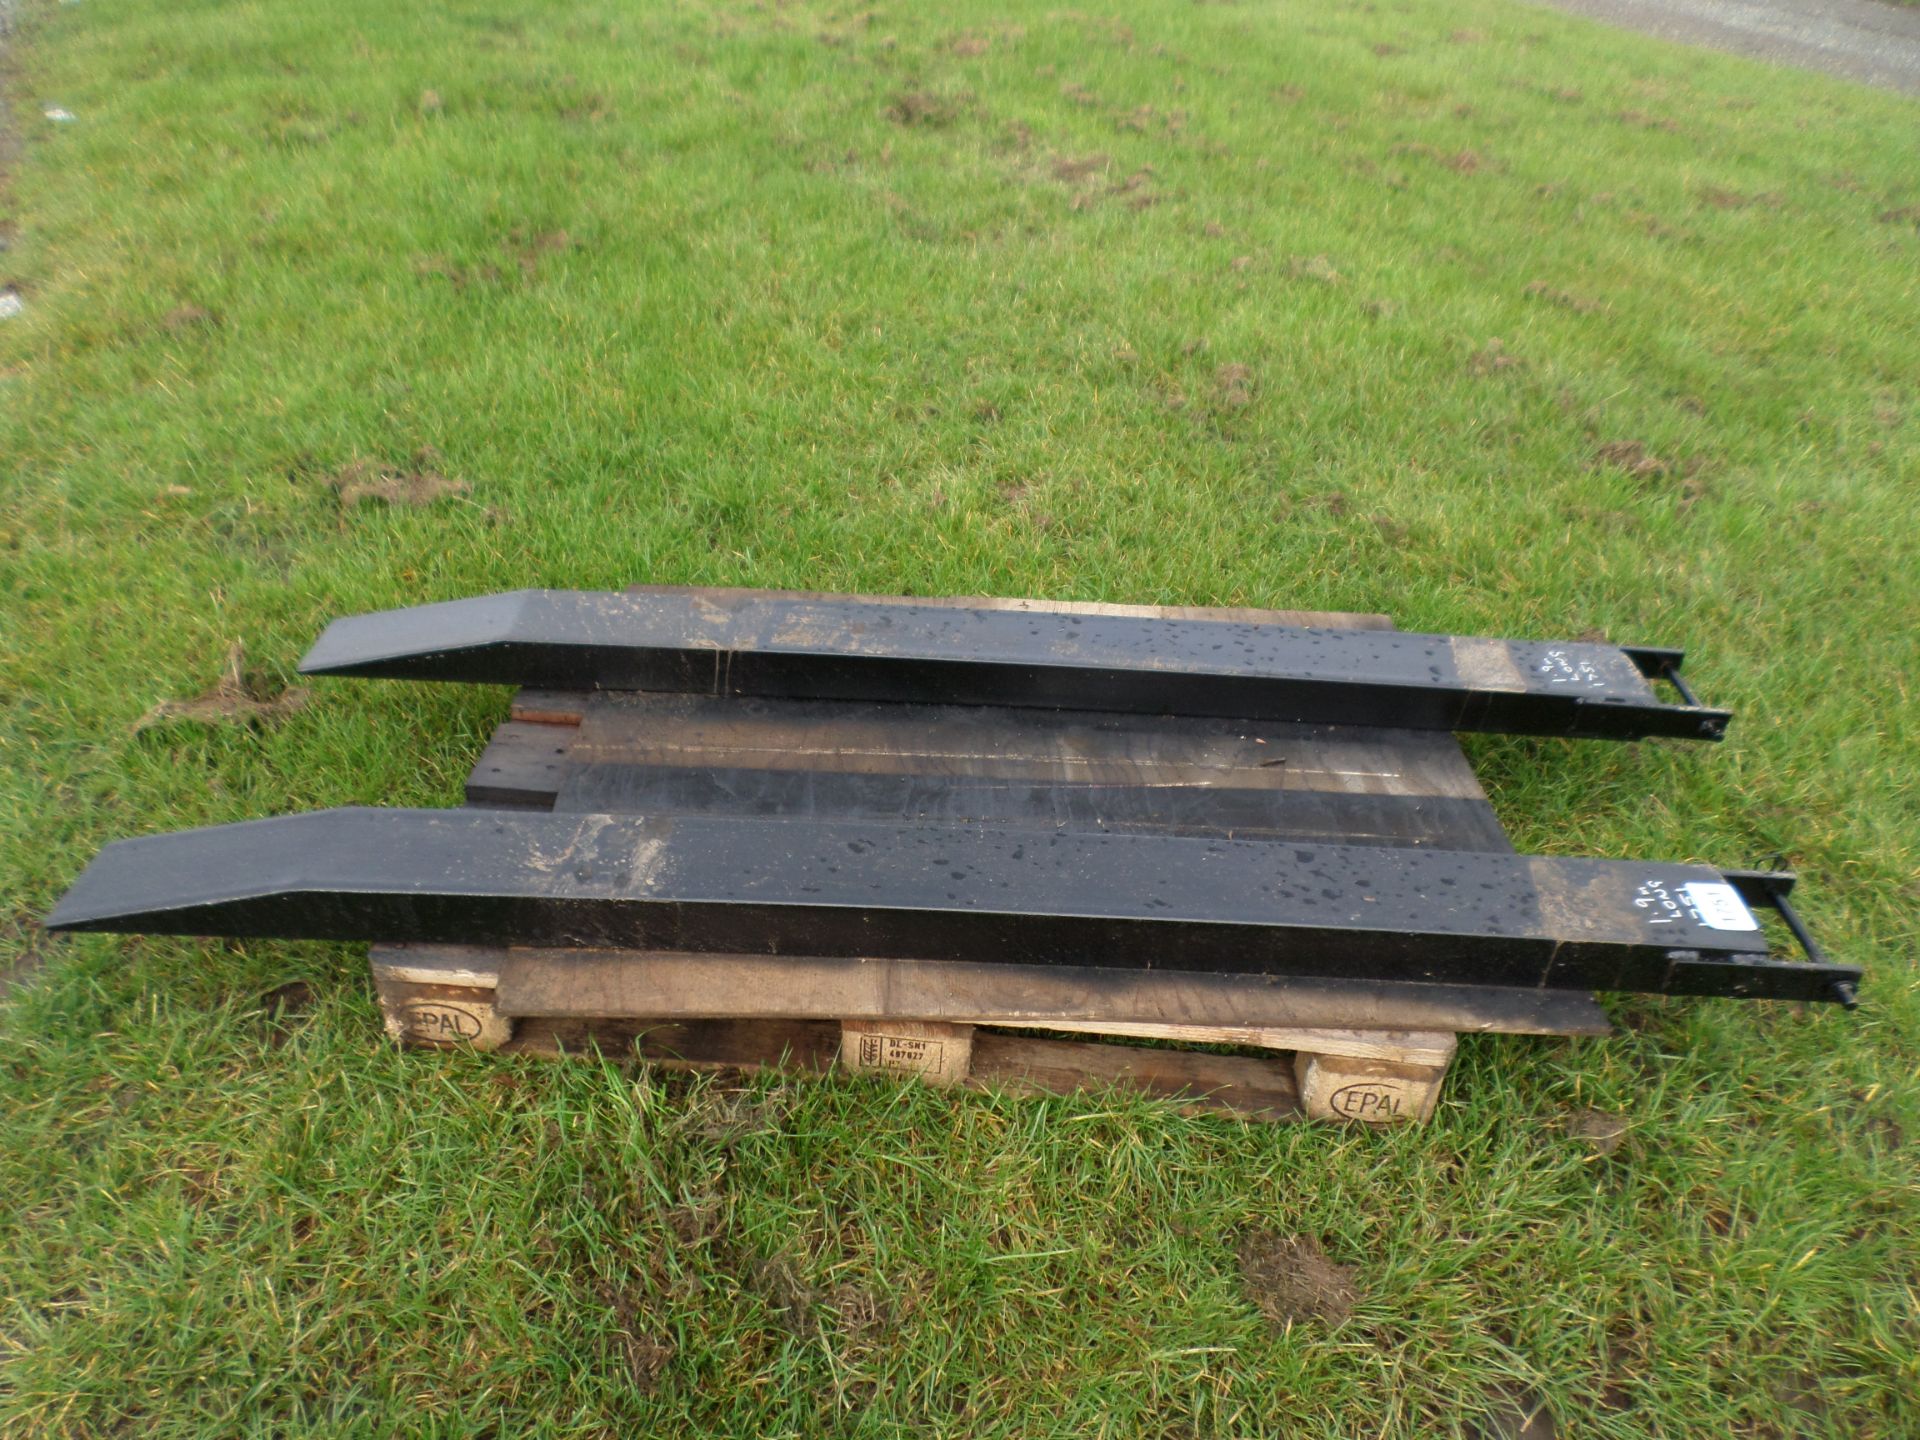 Pair of forklift extension tines, 1.9m long